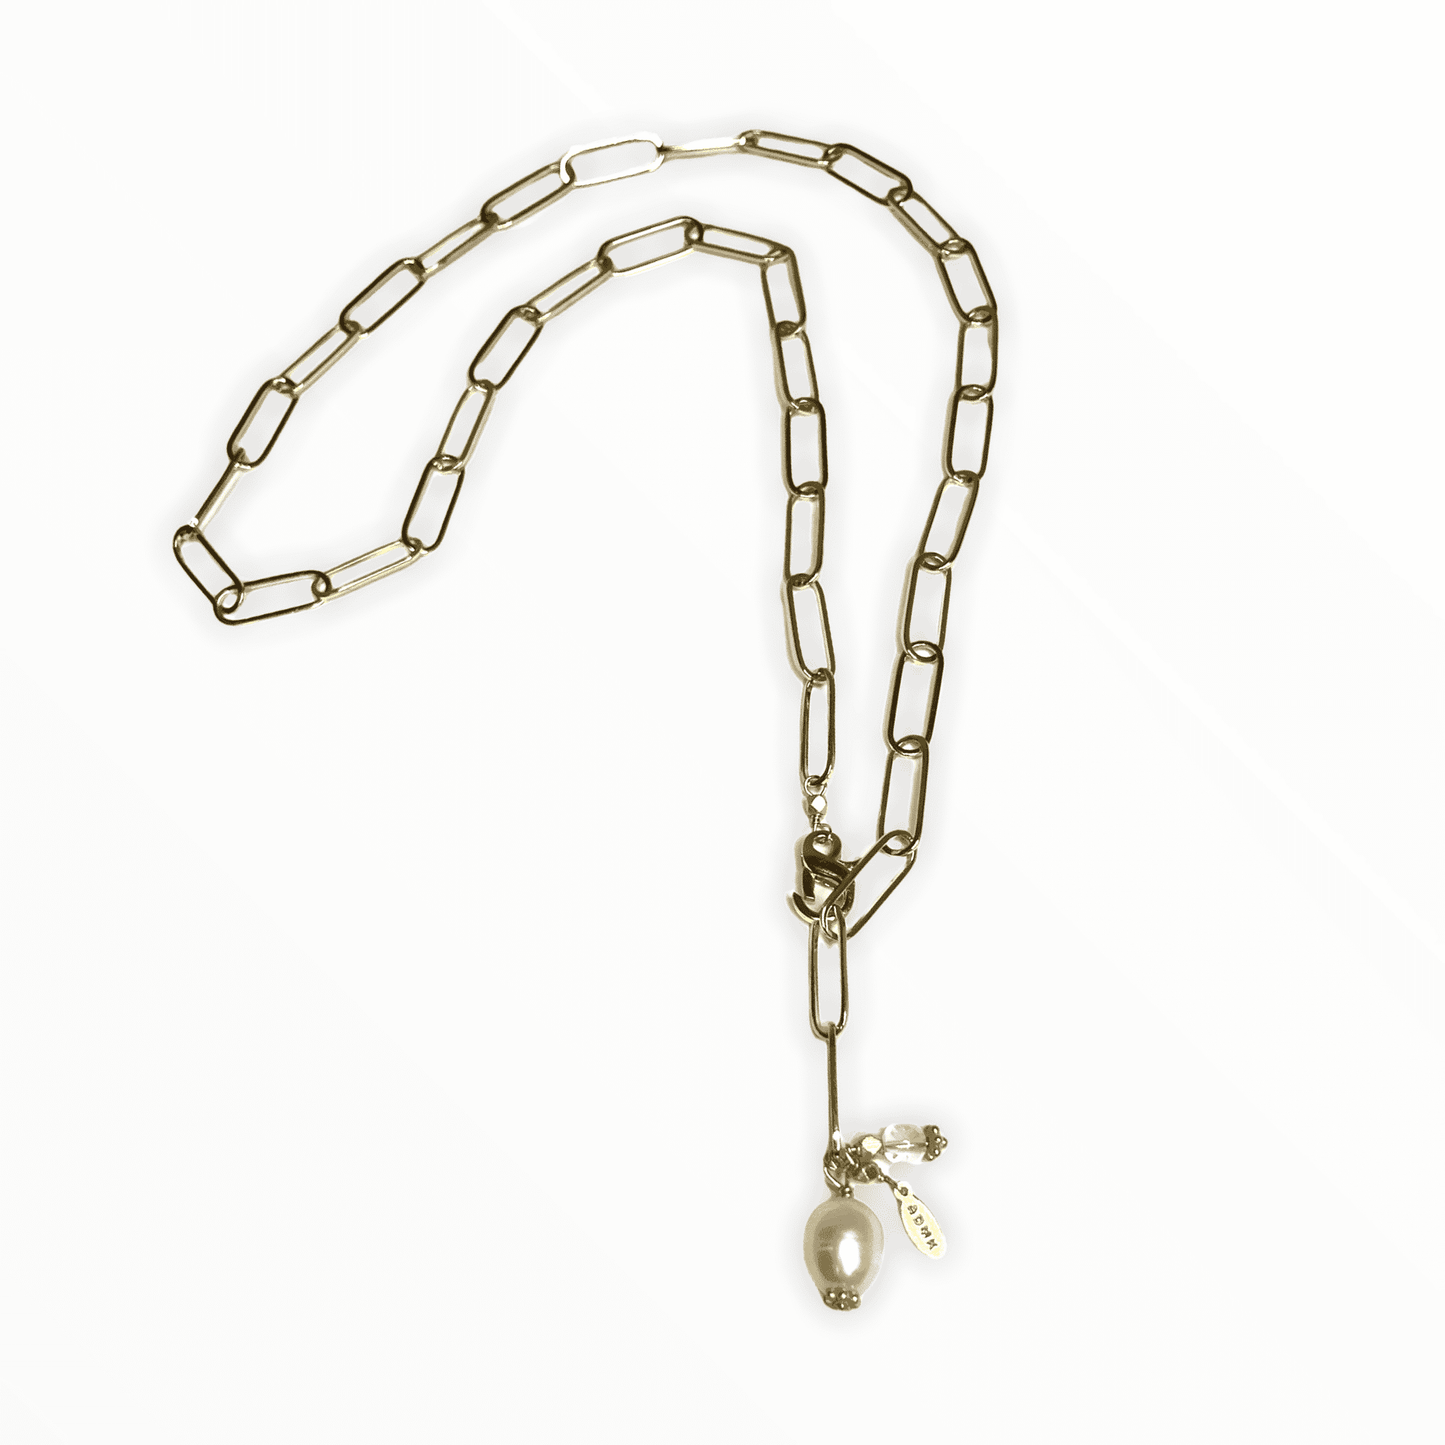 Gold Long Adjustable Paperclip ADMK Necklace with Pearl and Rock Crystal Accents | ADMK, Inc.